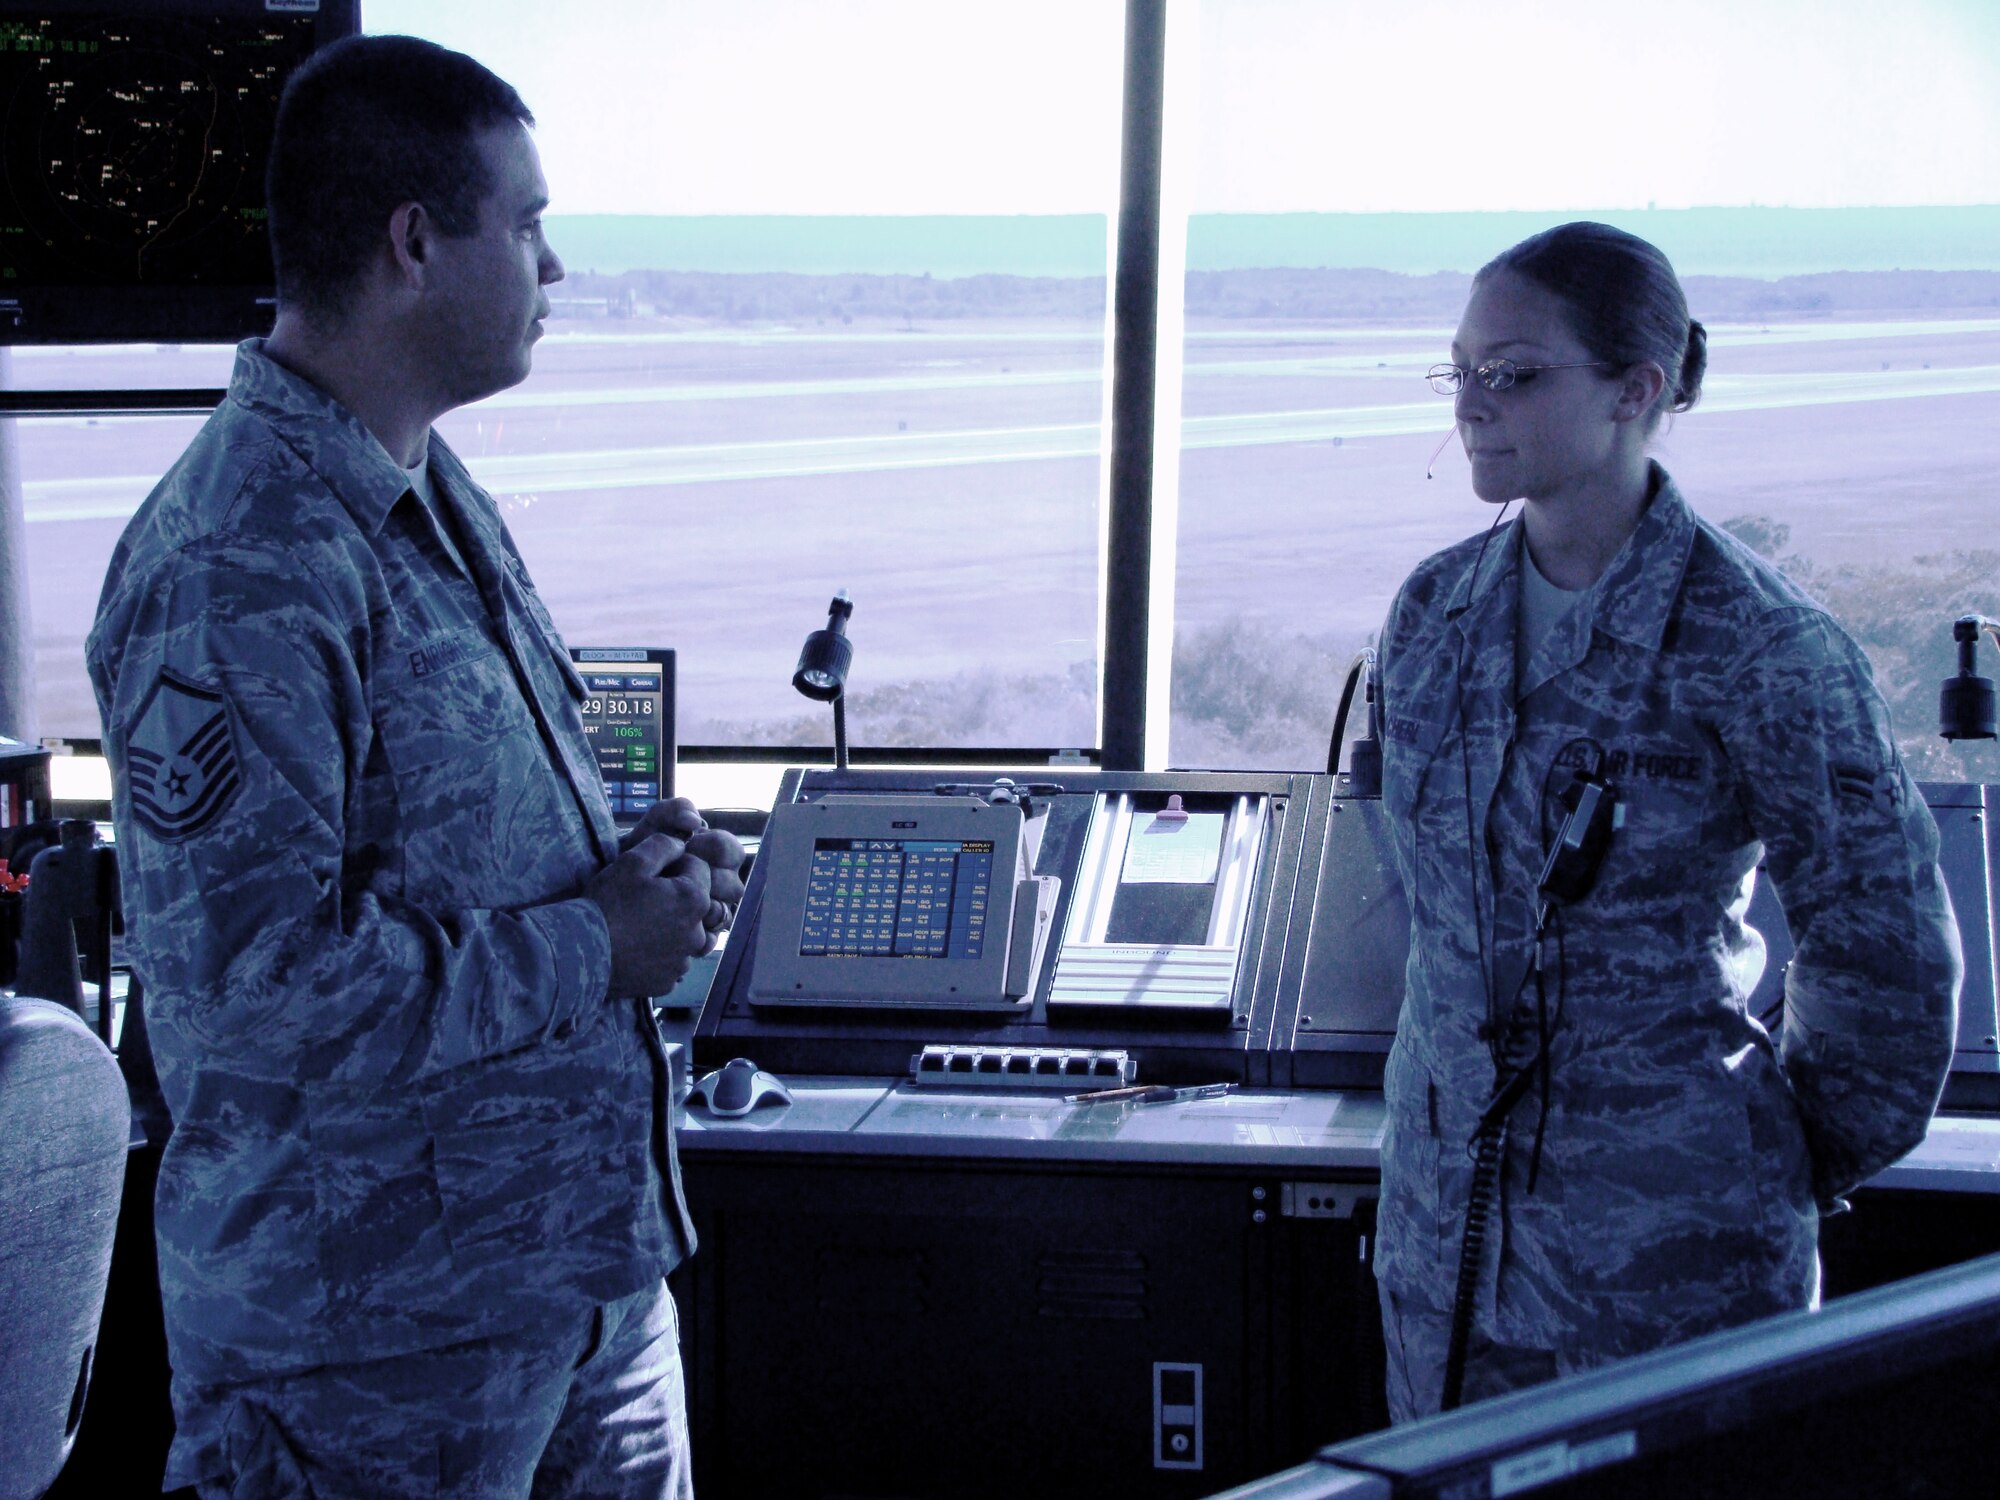 Senior Airman Kristina Zacherl (right), air traffic controller for the 6th Operations Support Squadron, meets with a co-worker during operations at her squadron at MacDill Air Force Base, Fla., in 2010. On April 1, 2011, Airman Zacherl was named the 2010 Air Mobility Command Airman of the Year. (U.S. Air Force Photo)

